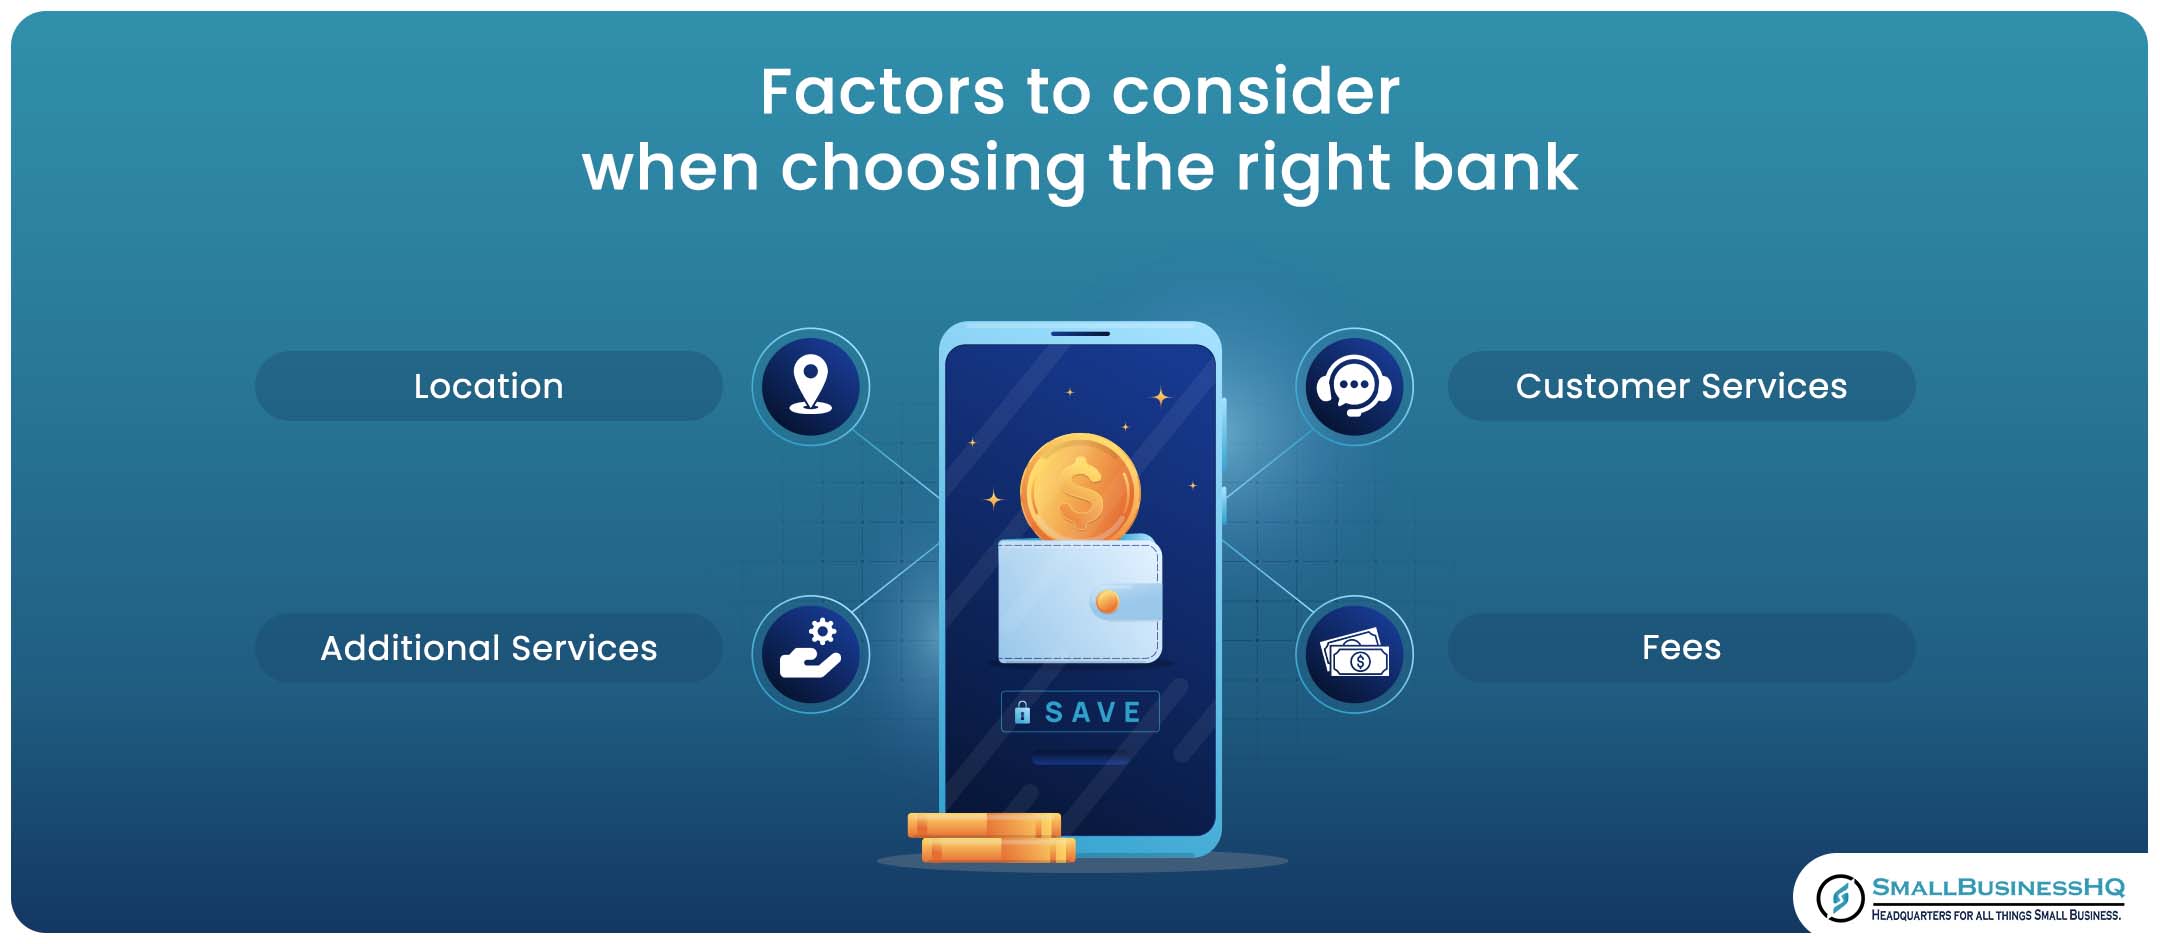 Factors to consider when choosing the right bank